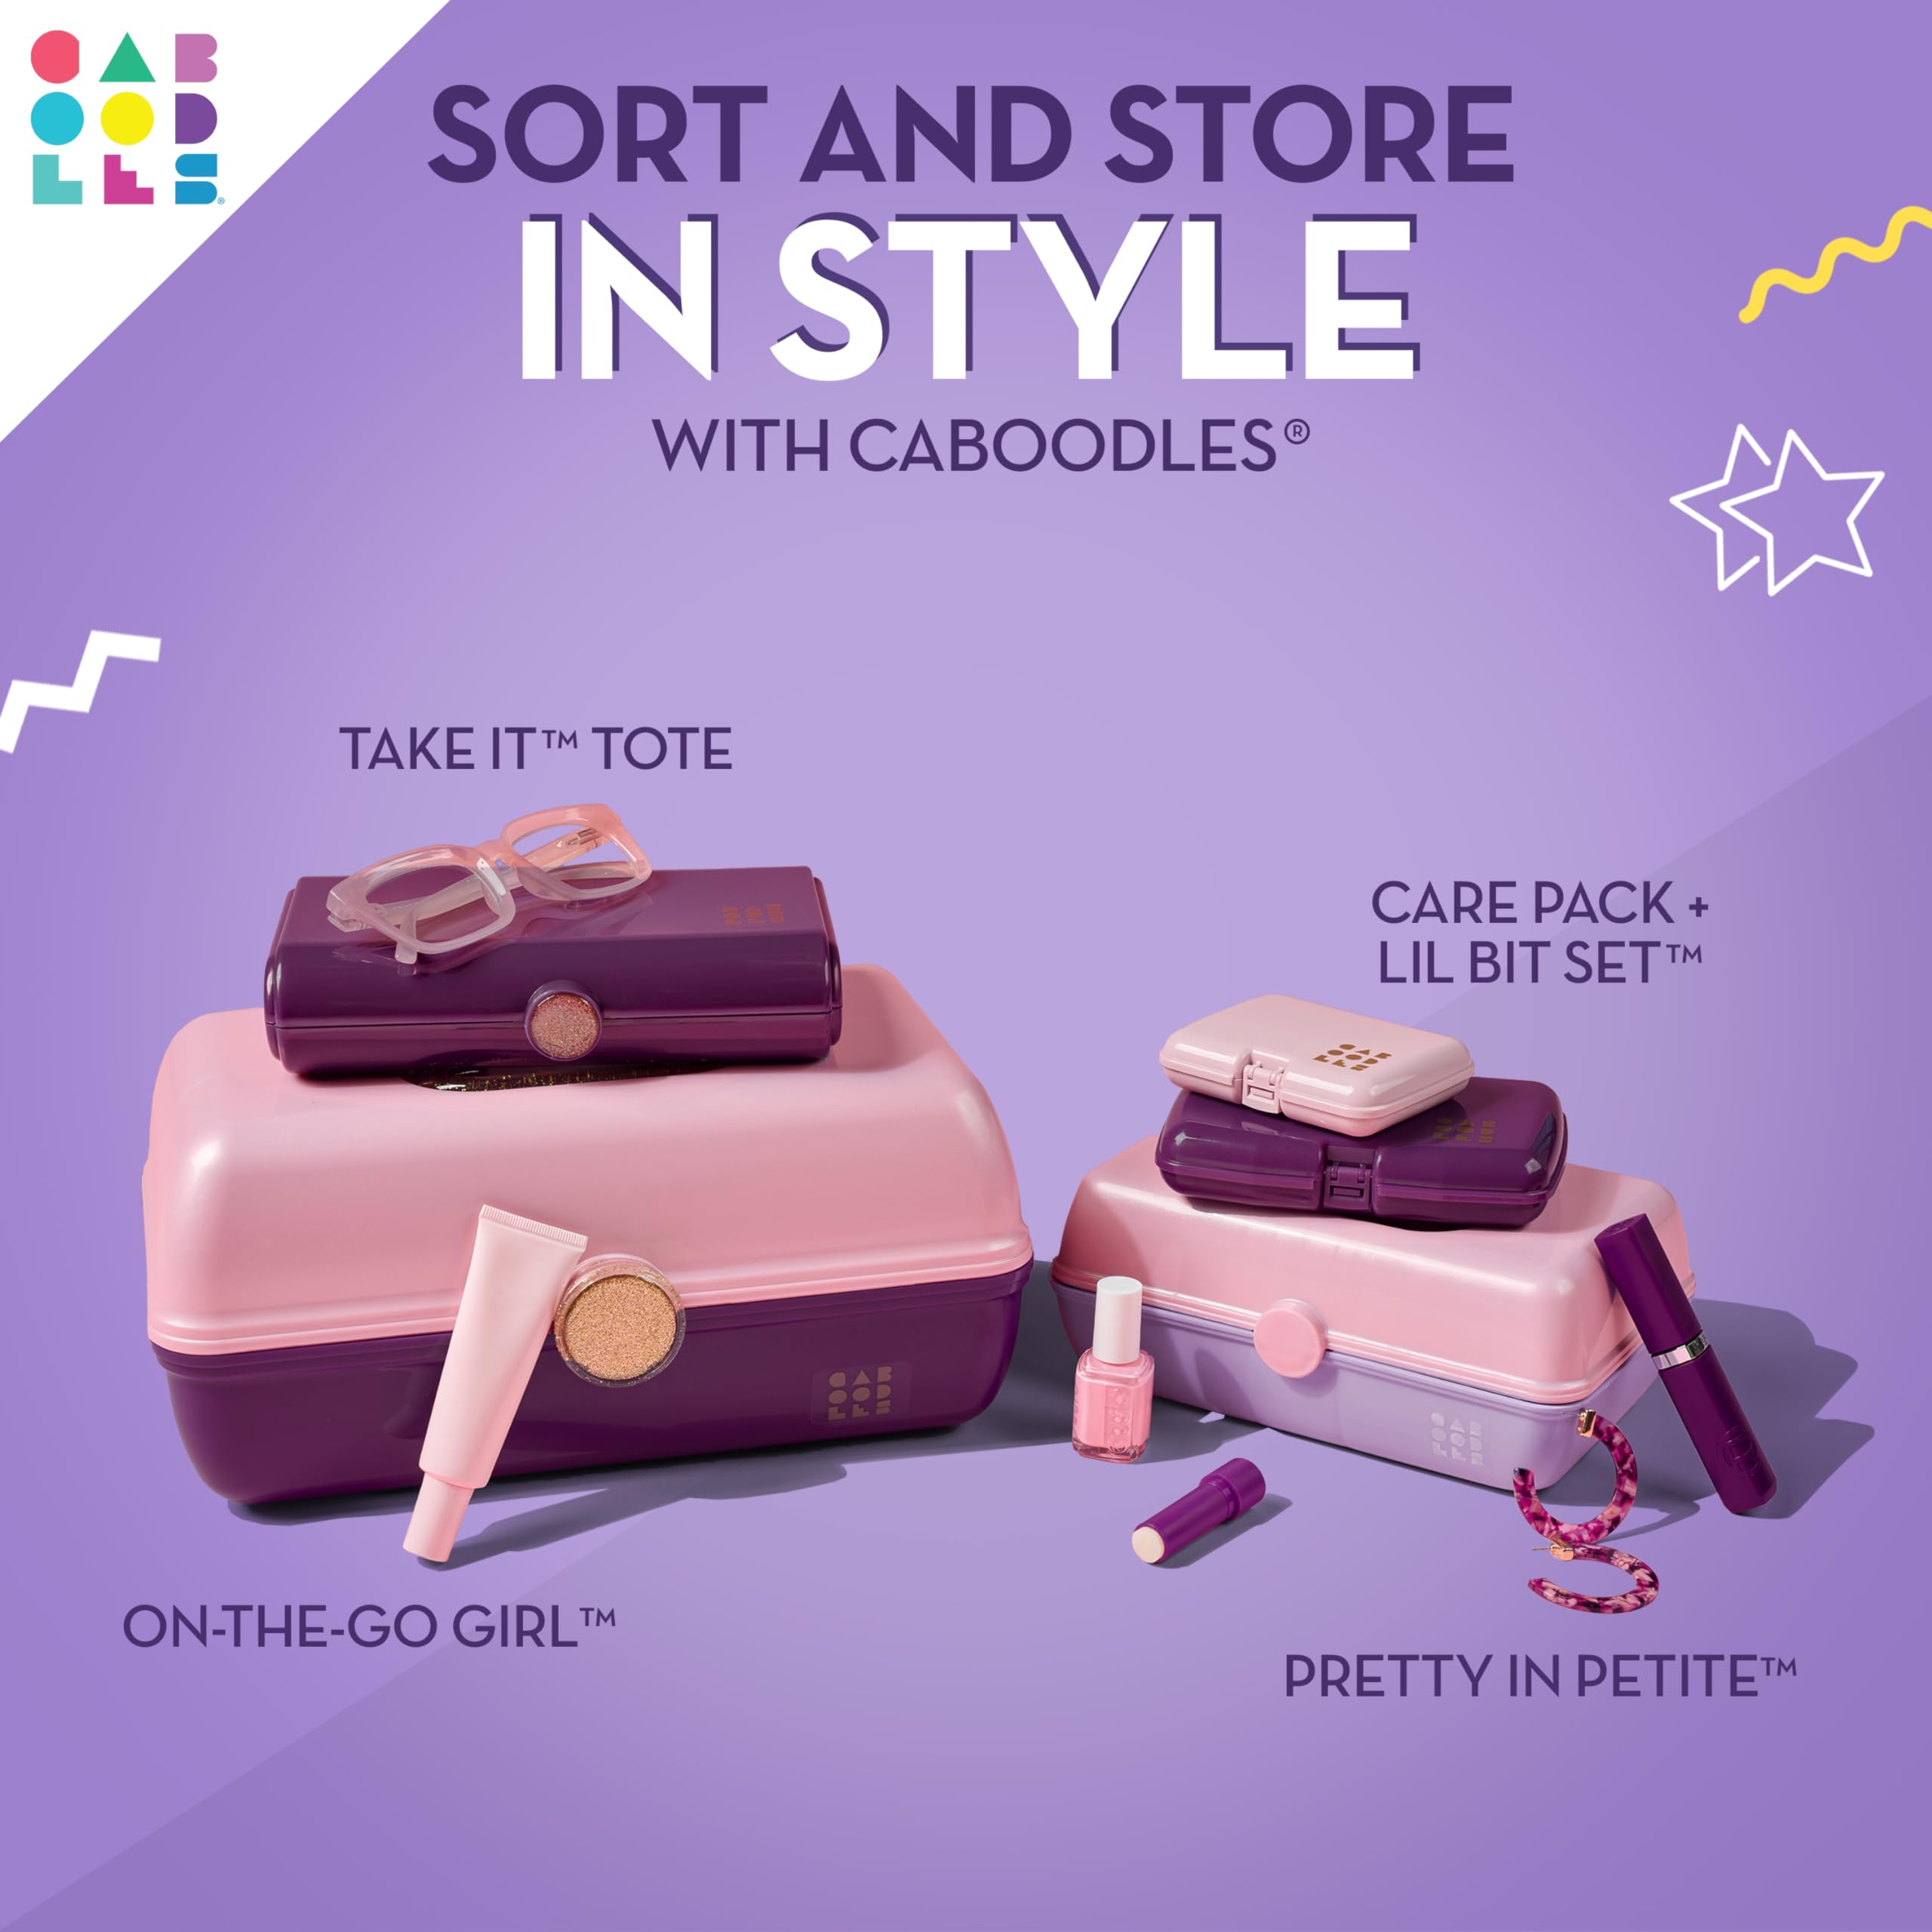 Caboodles Pretty in Petite Makeup Box, Two-Tone Lavender on Violet, Hard Plastic Organizer Box, 2 Swivel Trays, Fashion Mirror, Secure Latch for Safe Travel